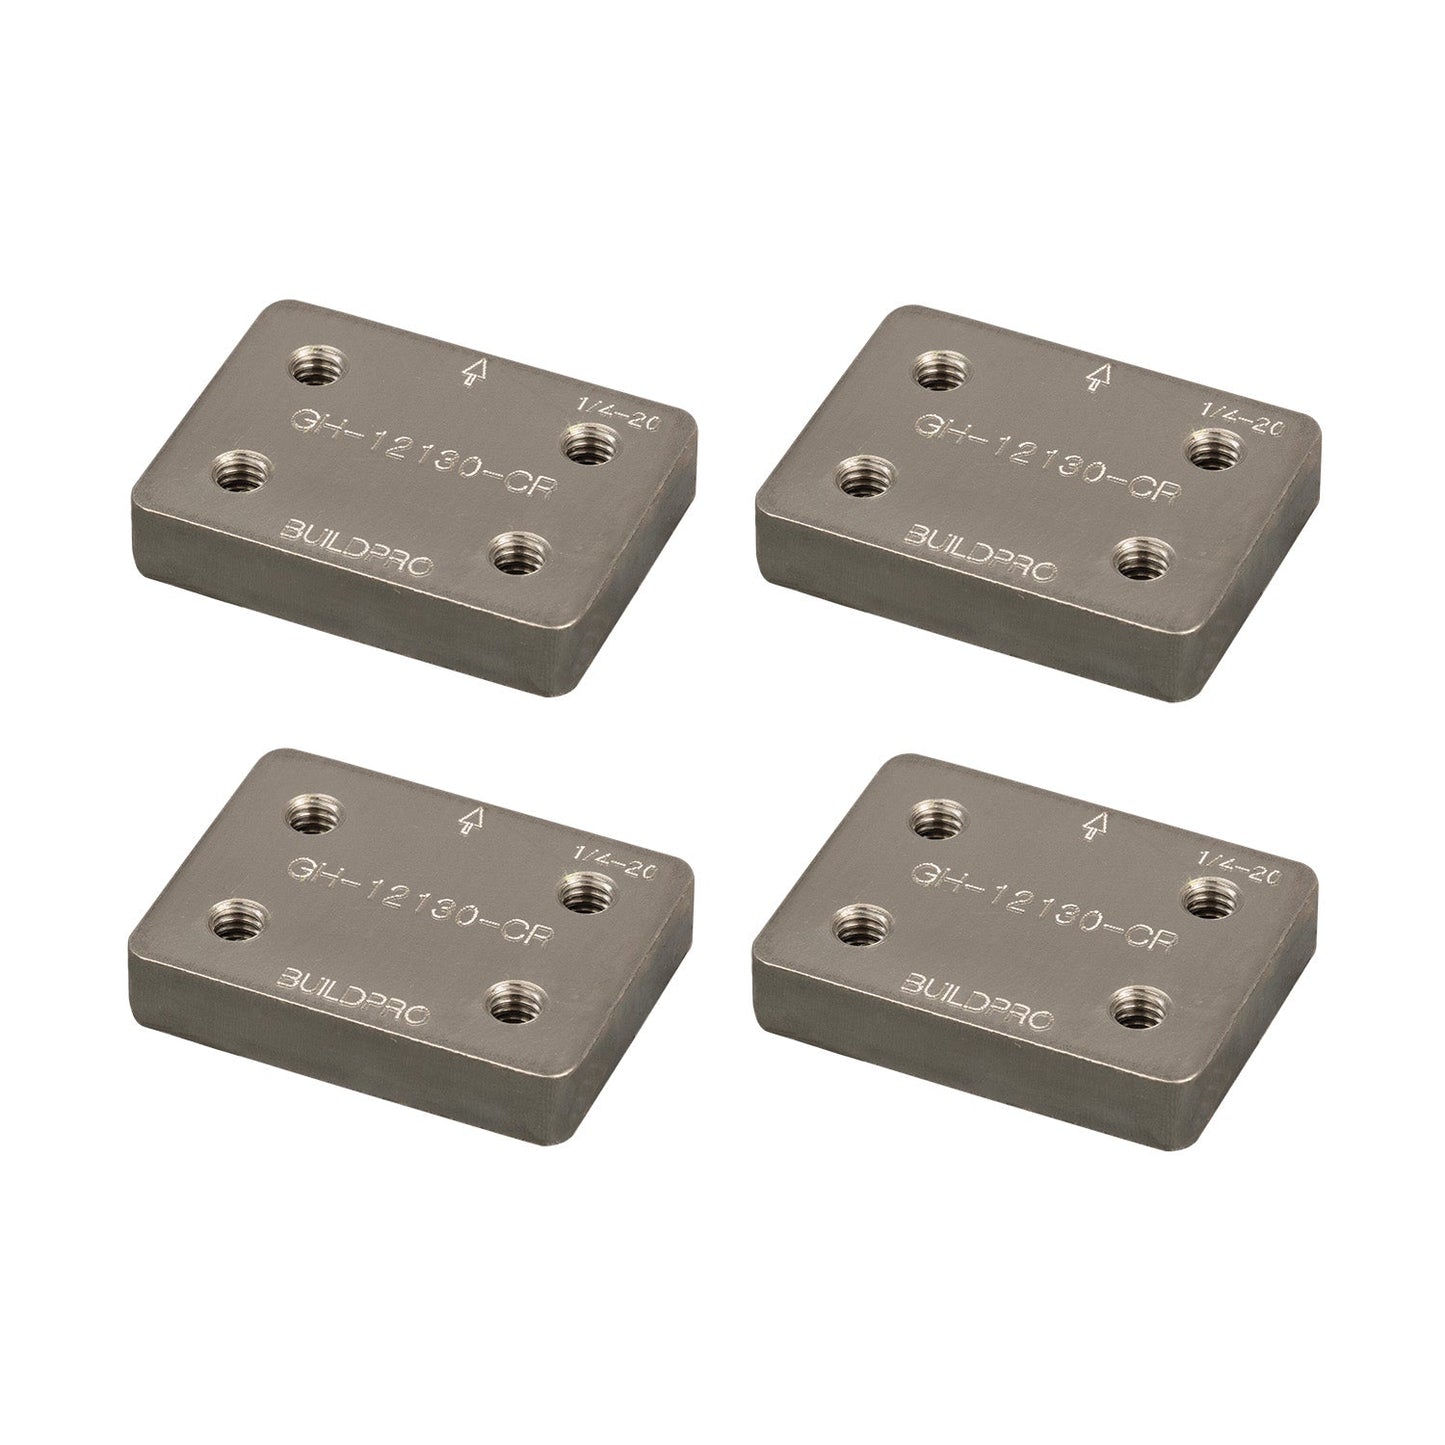 Mounting Adapter Plates for Toggle Clamps